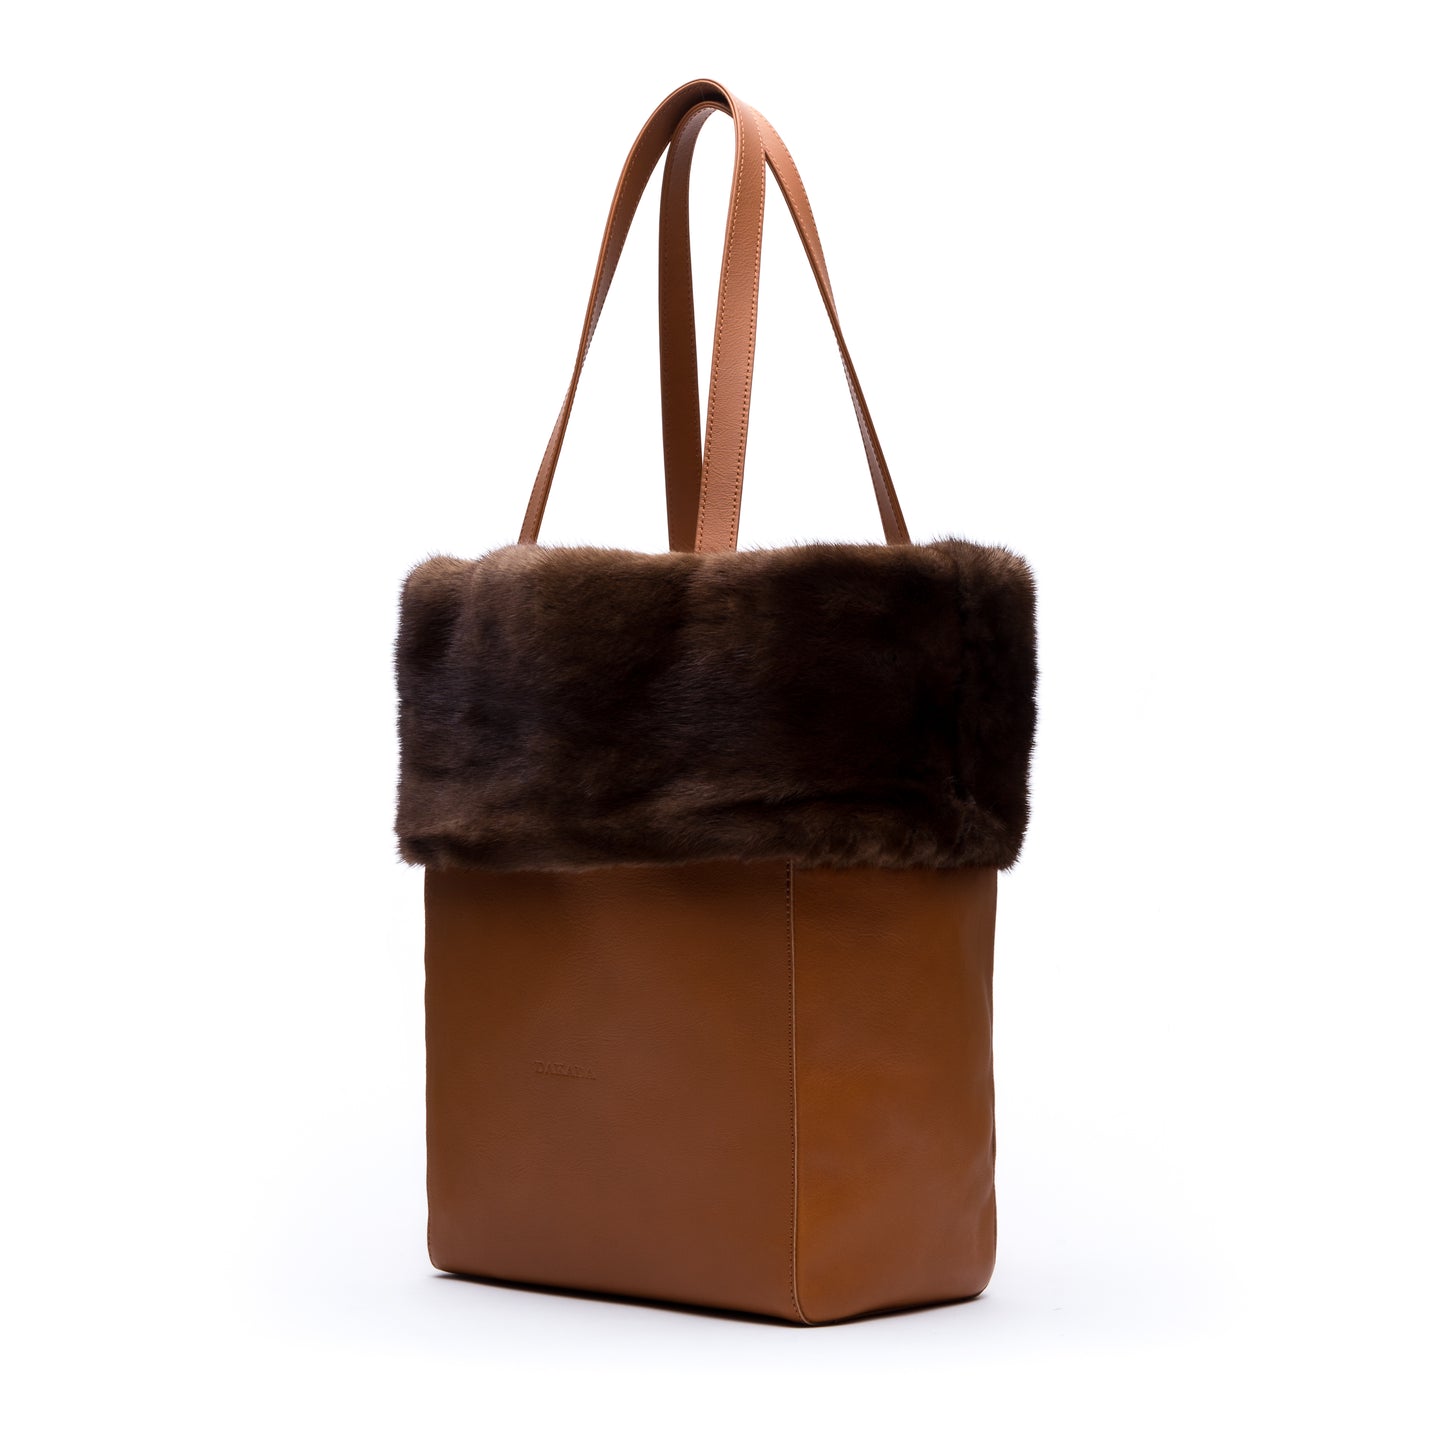 Kaley- Camel Leather Tote with Mahogany Mink